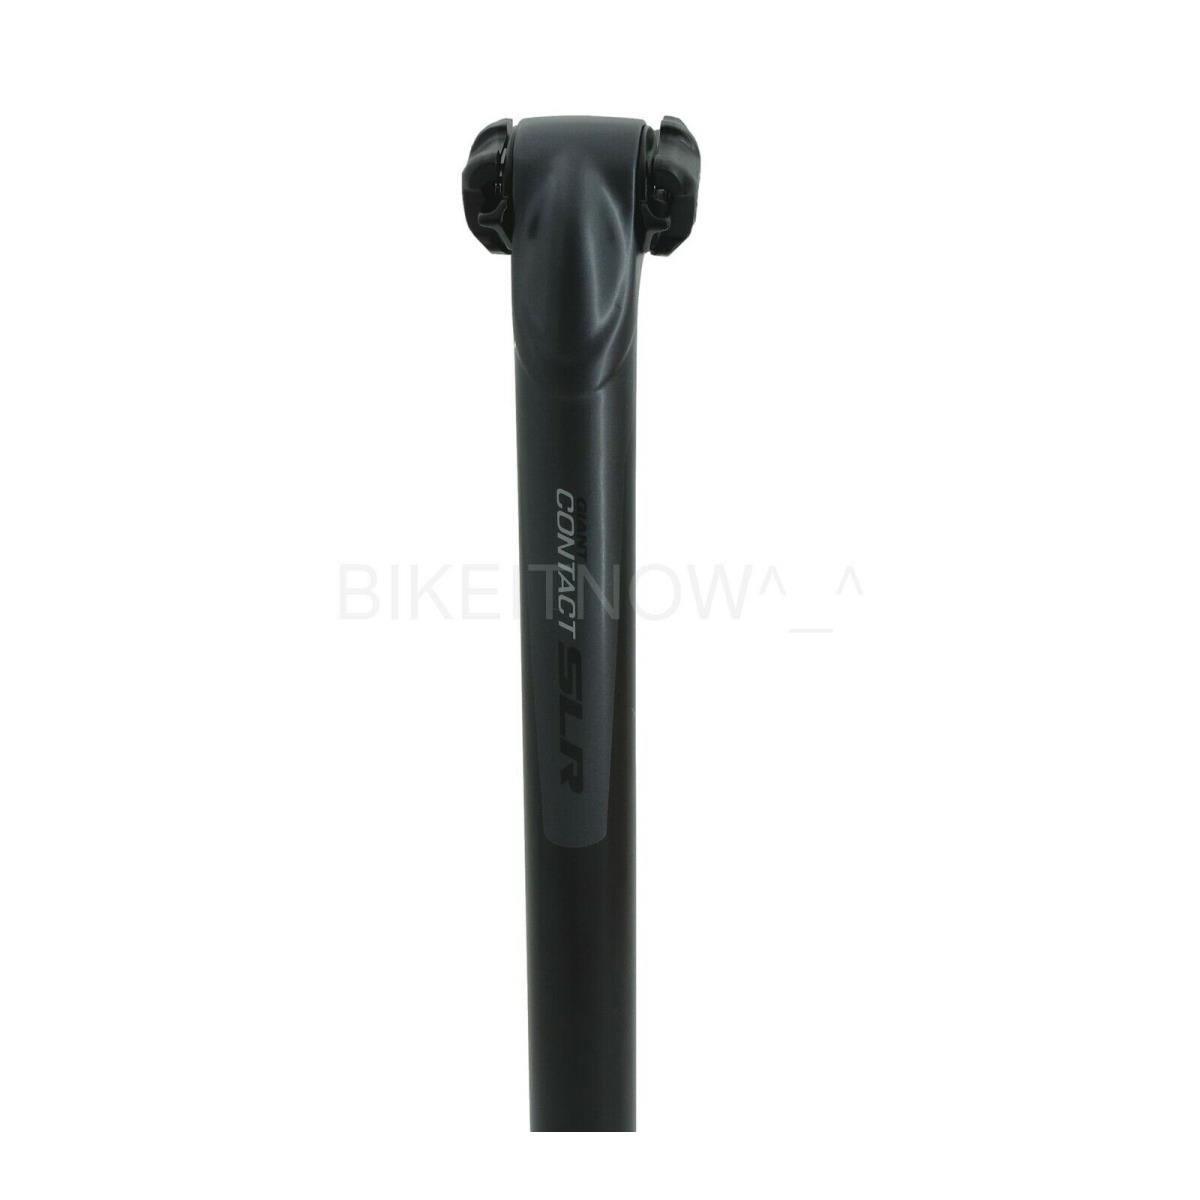 Giantt Contact Slr UD Carbon Seat Post 375 x 30.9mm For Road/mtb Bike Bicycle